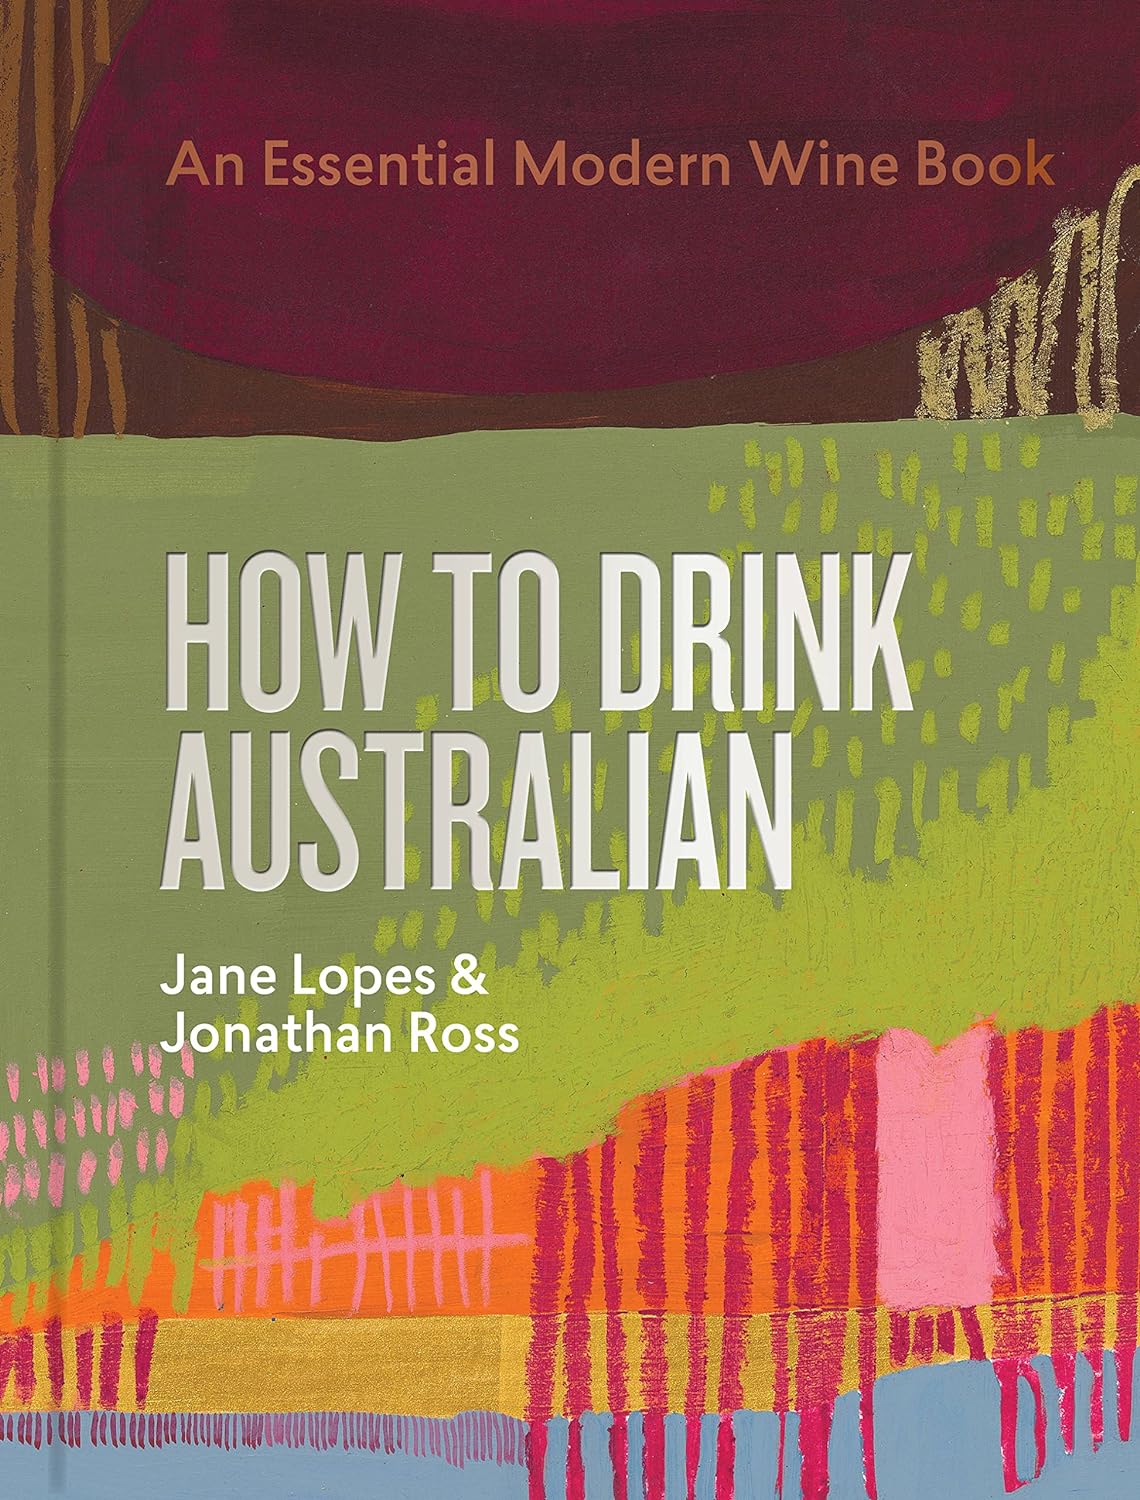 How to Drink Australian: An Essential Modern Wine Book (Jane Lopes, Jonathan Ross)